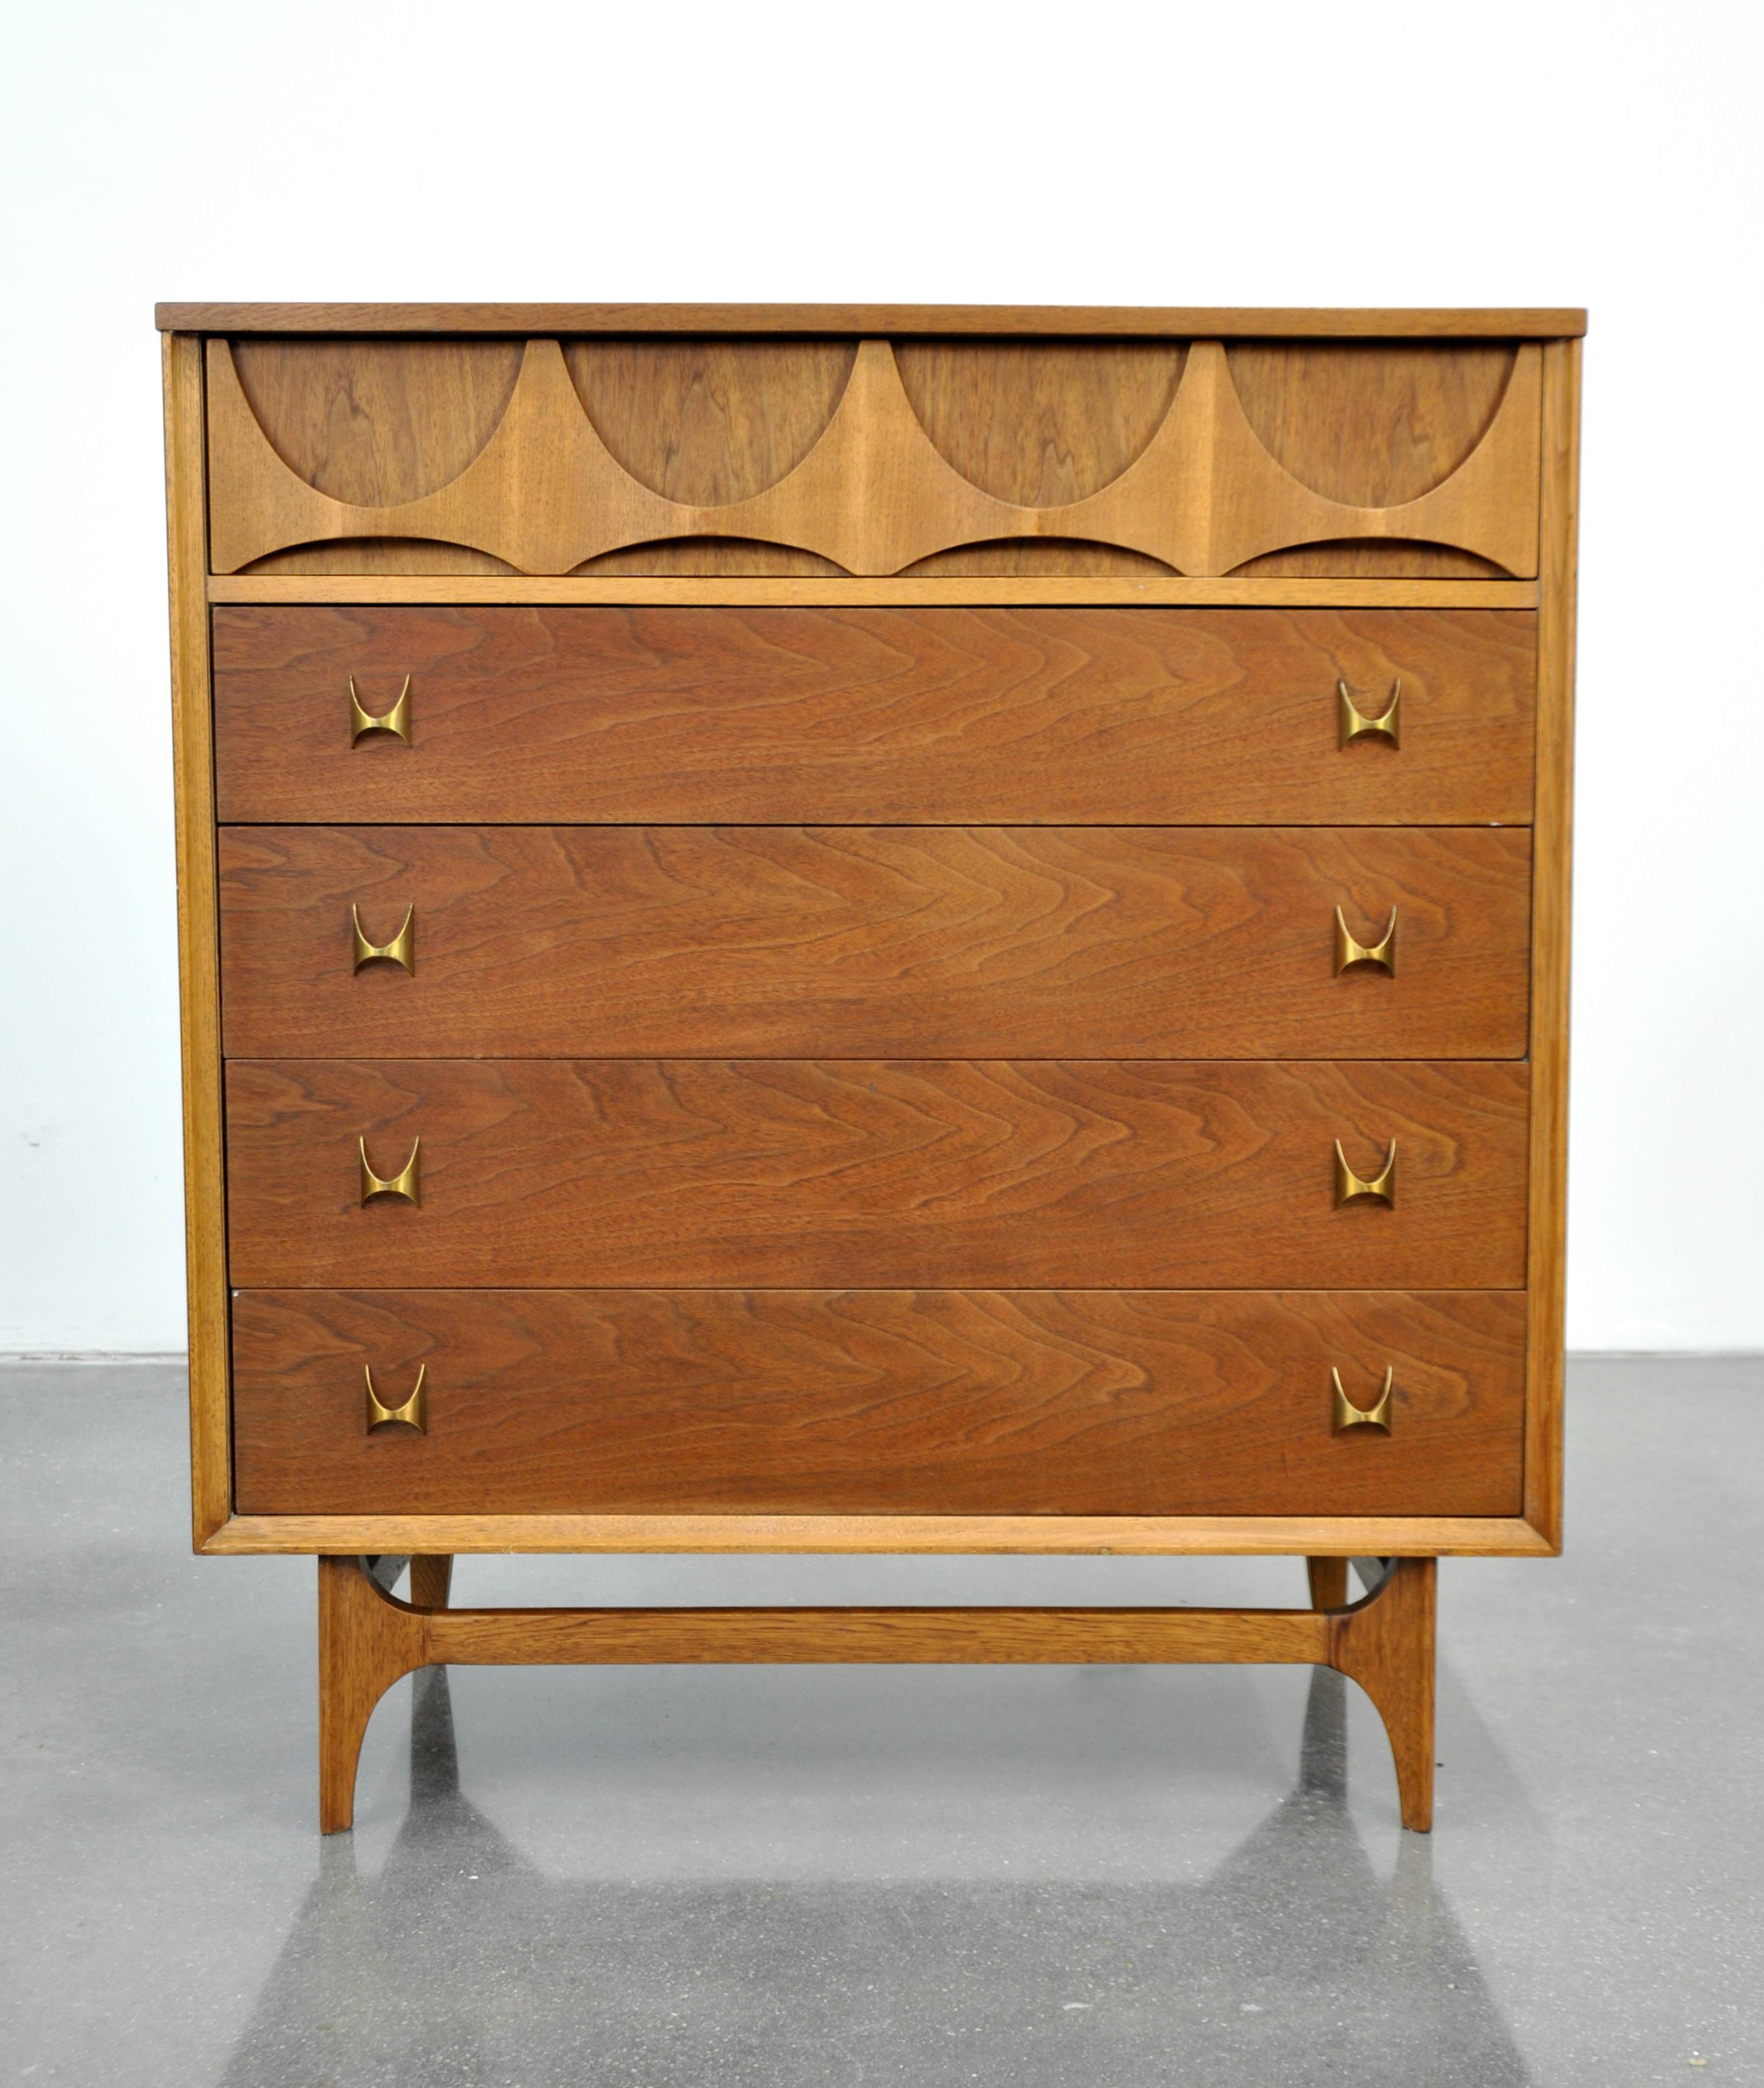 A vintage Mid-Century Modern walnut and brass chest of drawers from the highly desirable Brasilia collection manufactured by Broyhill in the 1960s. The bachelor or gentleman's chest's top drawer features the signature relief cut and sculpted pattern